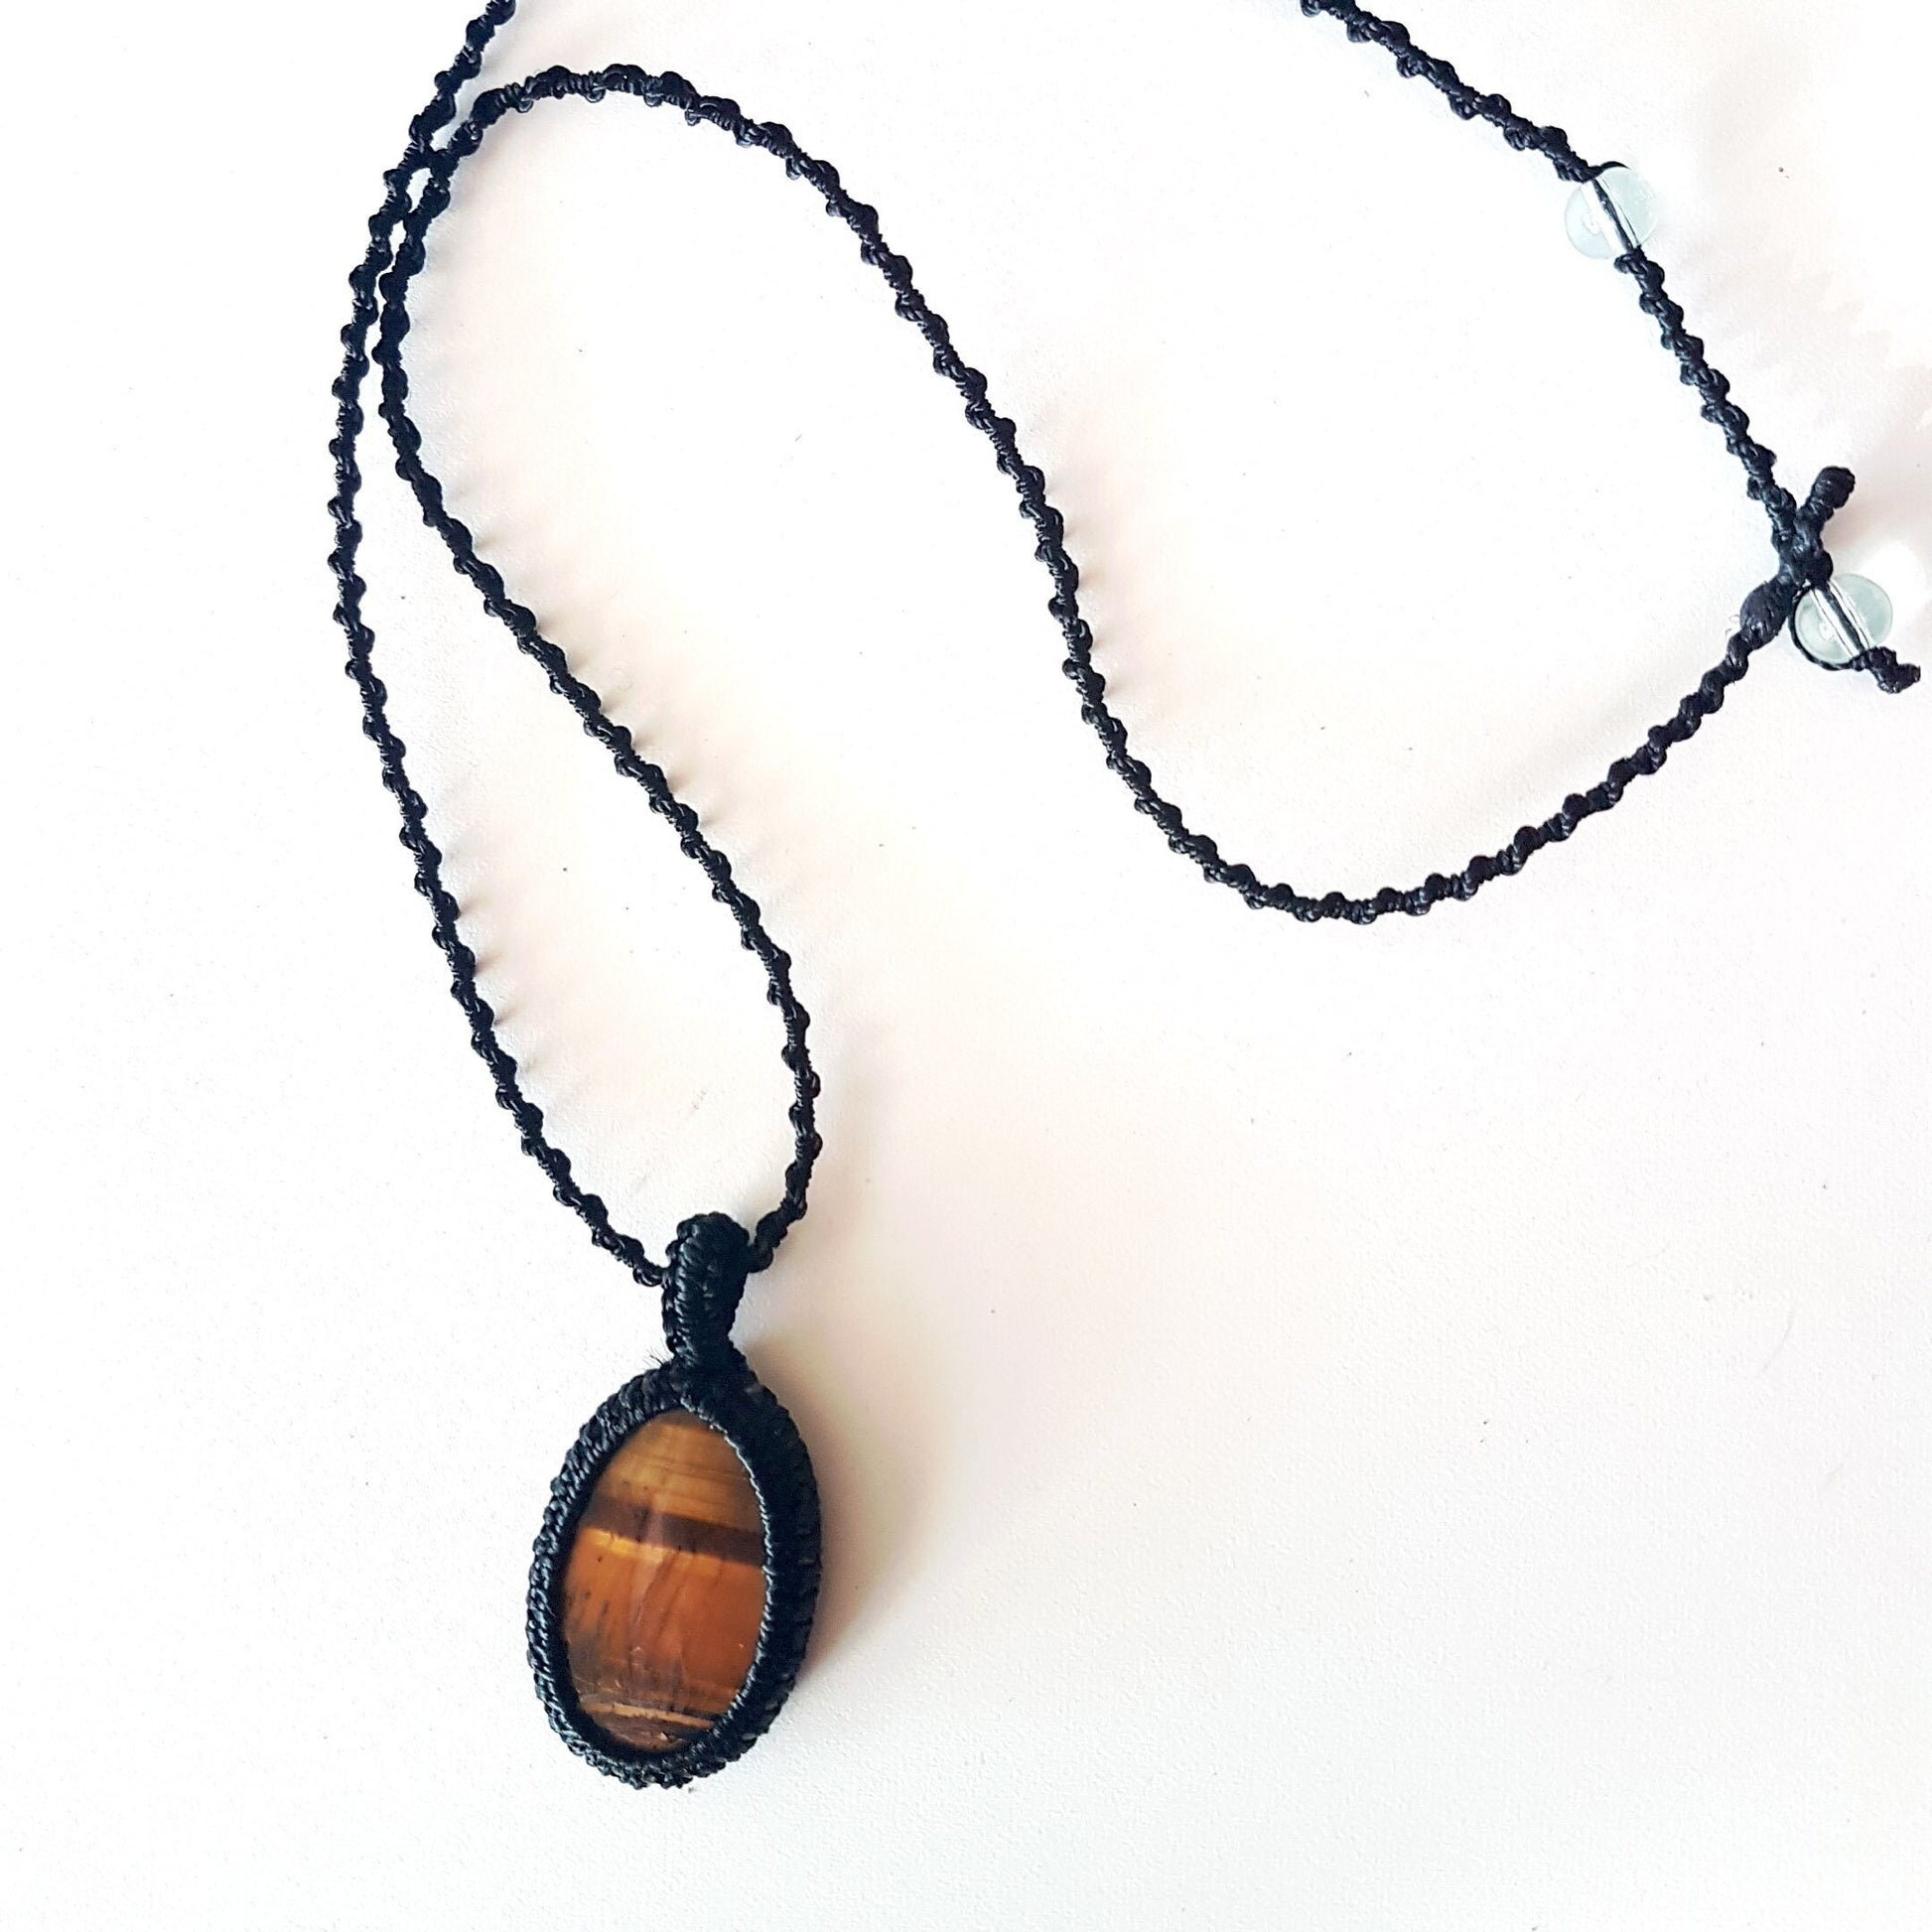 Gender neutral design tigereye pendant necklace. Hangs on a 20 inch black woven corkscrew knot cord. Adjustable length. Unisex jewelry. - Vintage India Ca